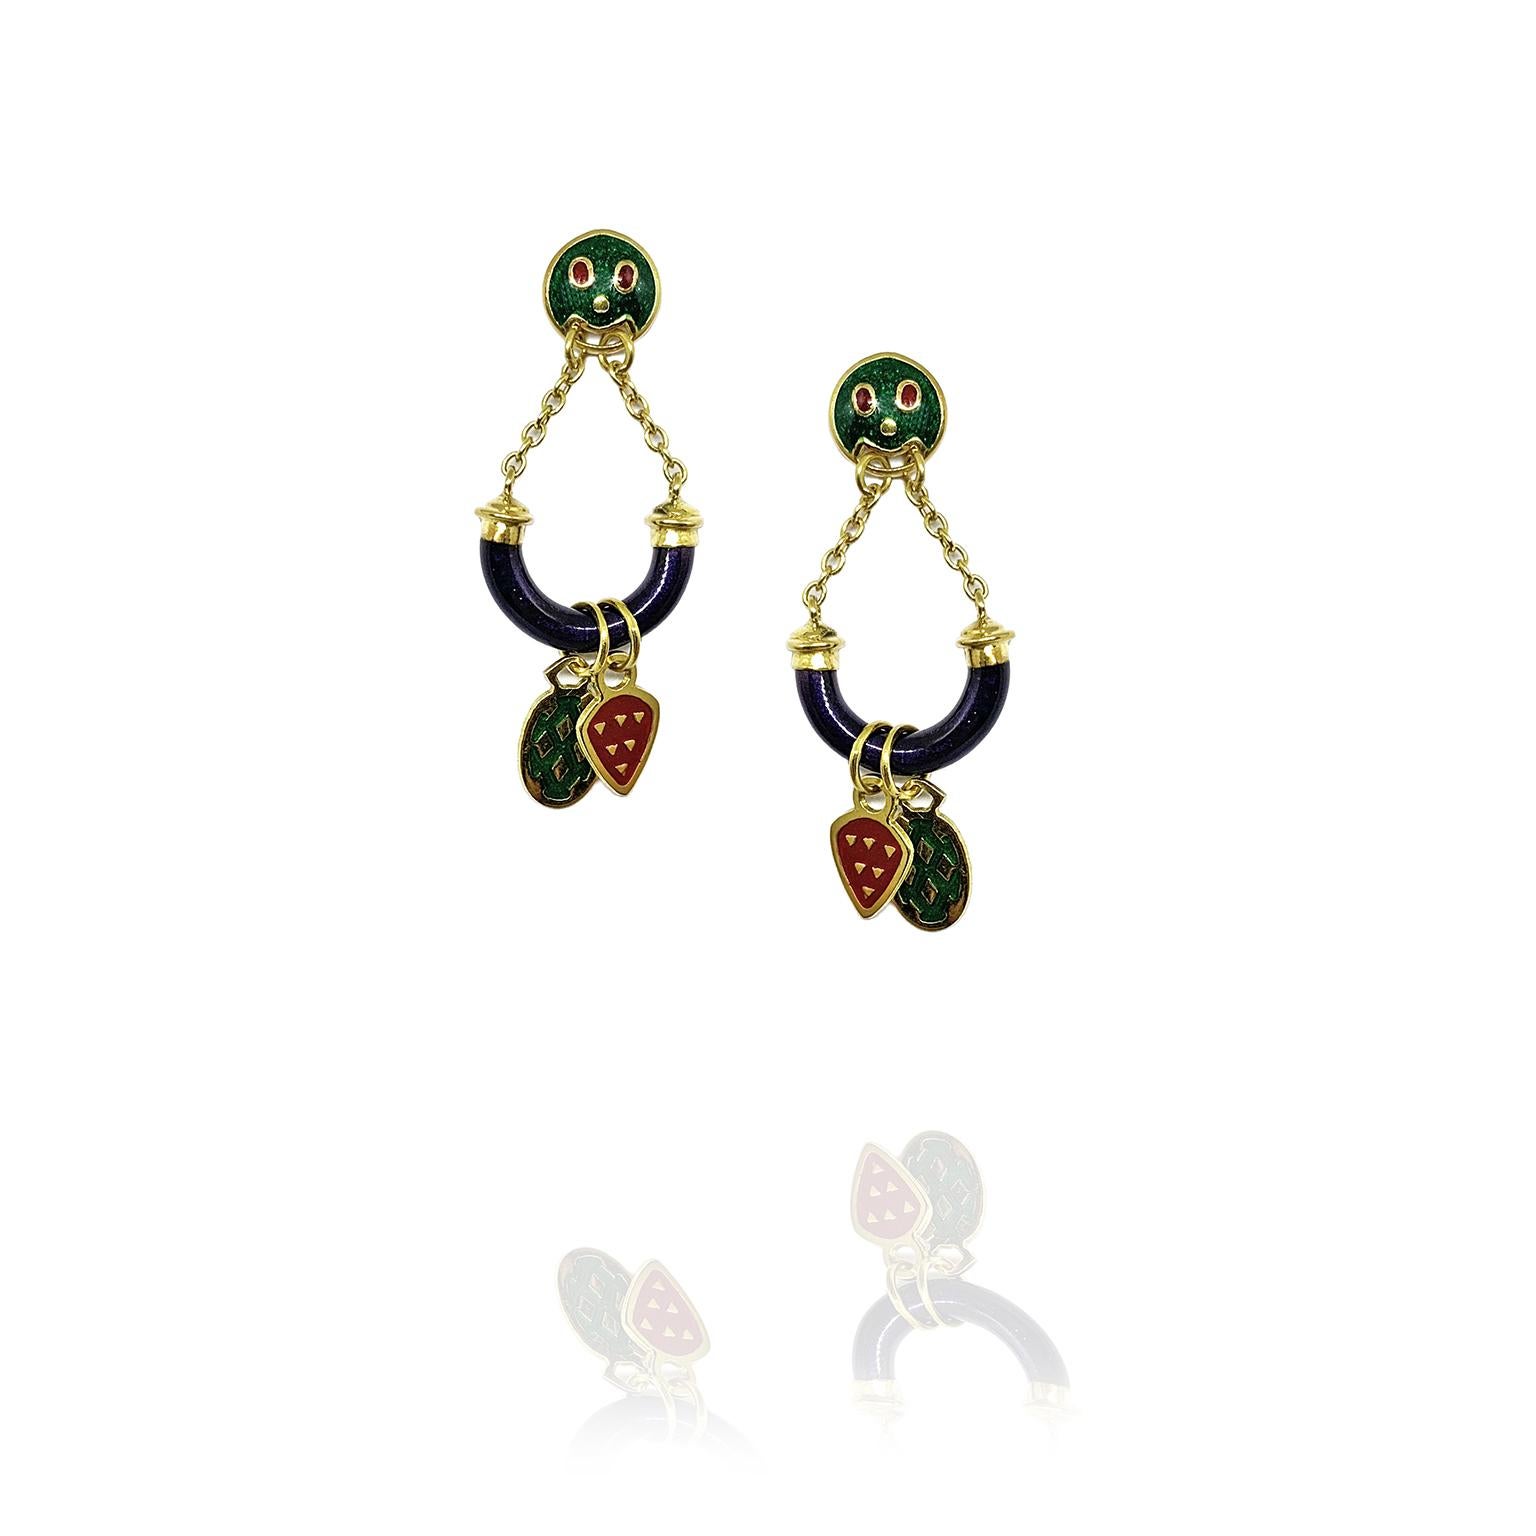 18kt yellow gold earrings whit charms enameled